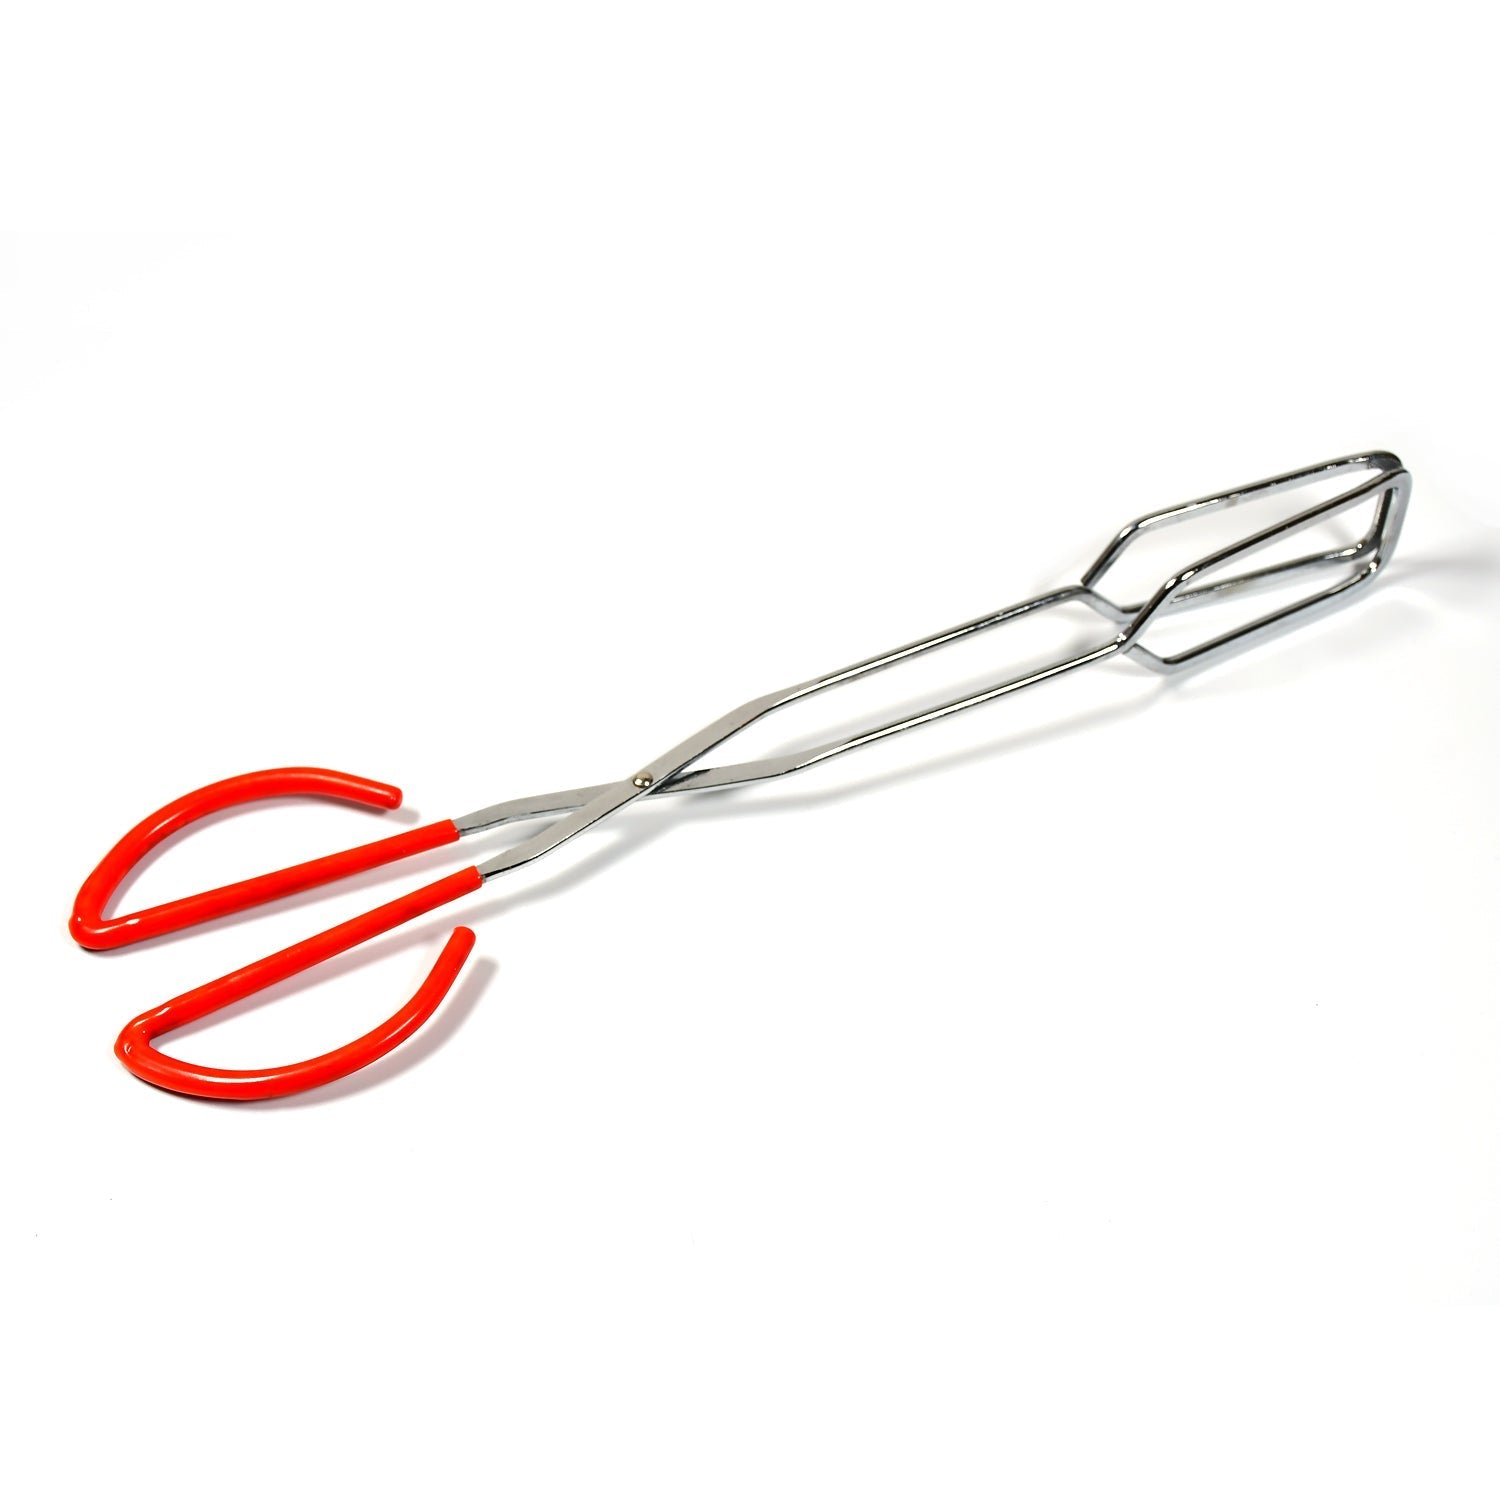 2984 Kitchen Baking BBQ Heat Resistant Cooking Food Clip with Silicone Tips Tongs , Pack of 1 DeoDap